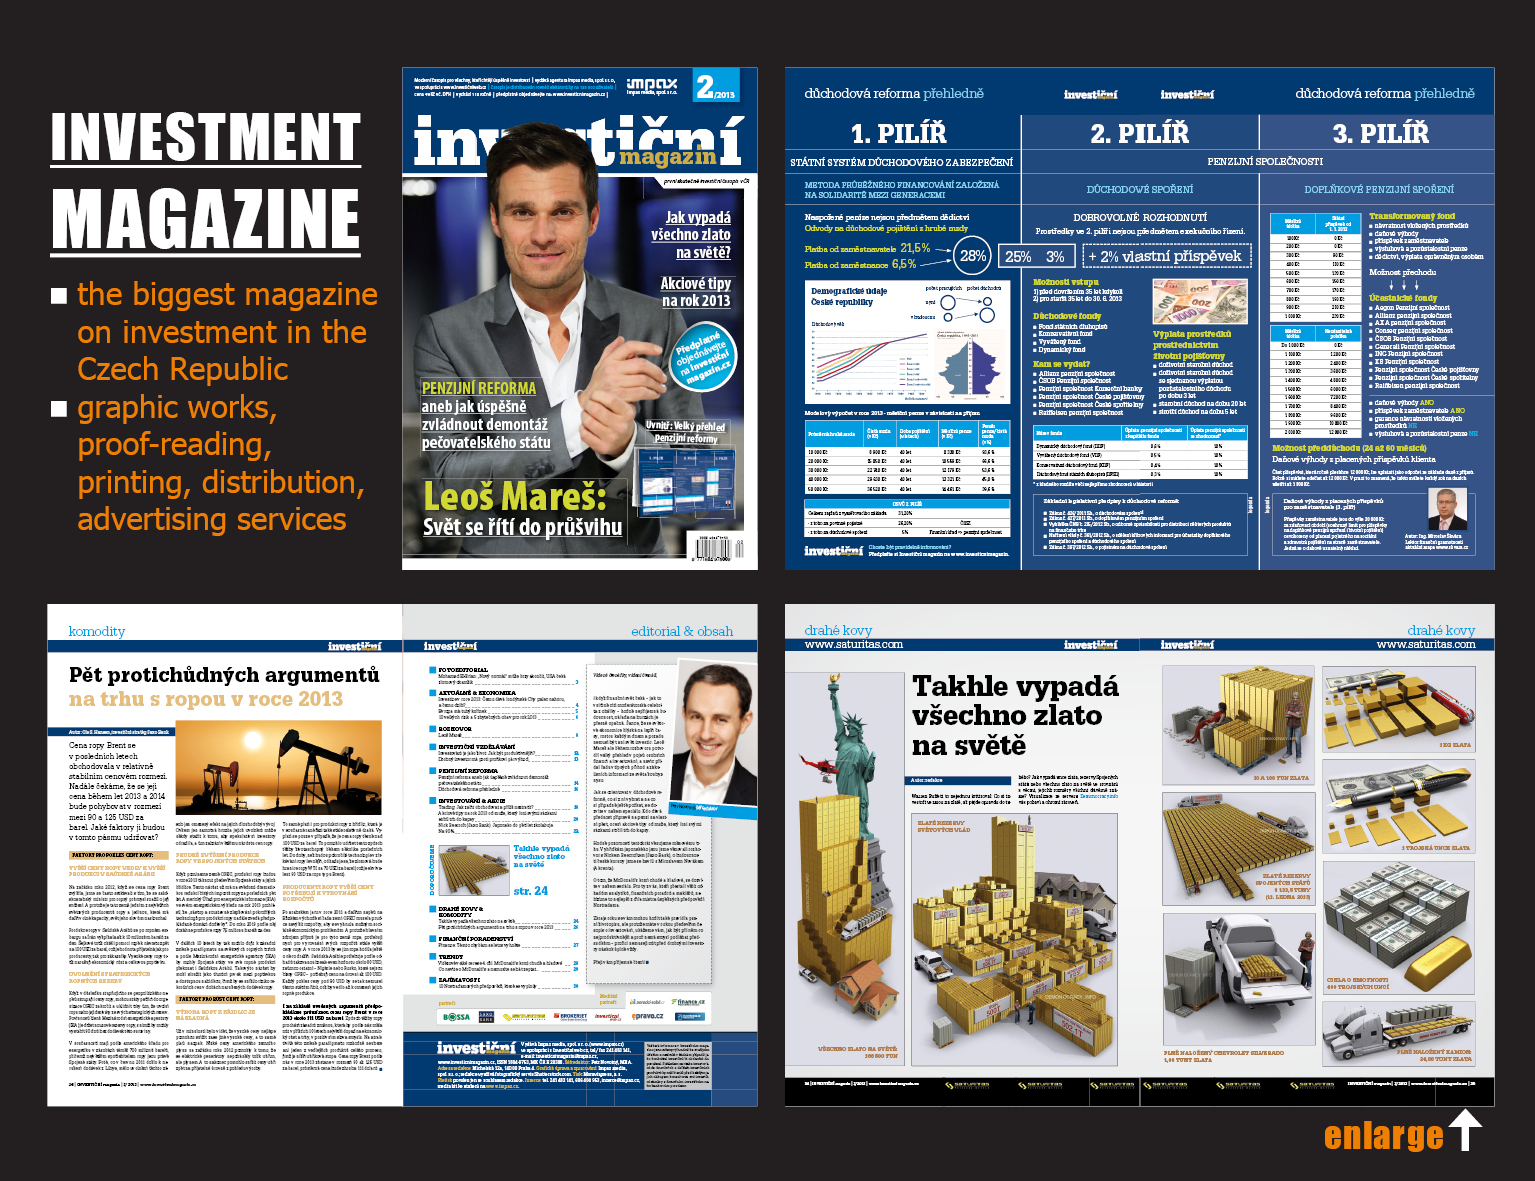 The biggest Czech magazine on investment intended for the general investment public